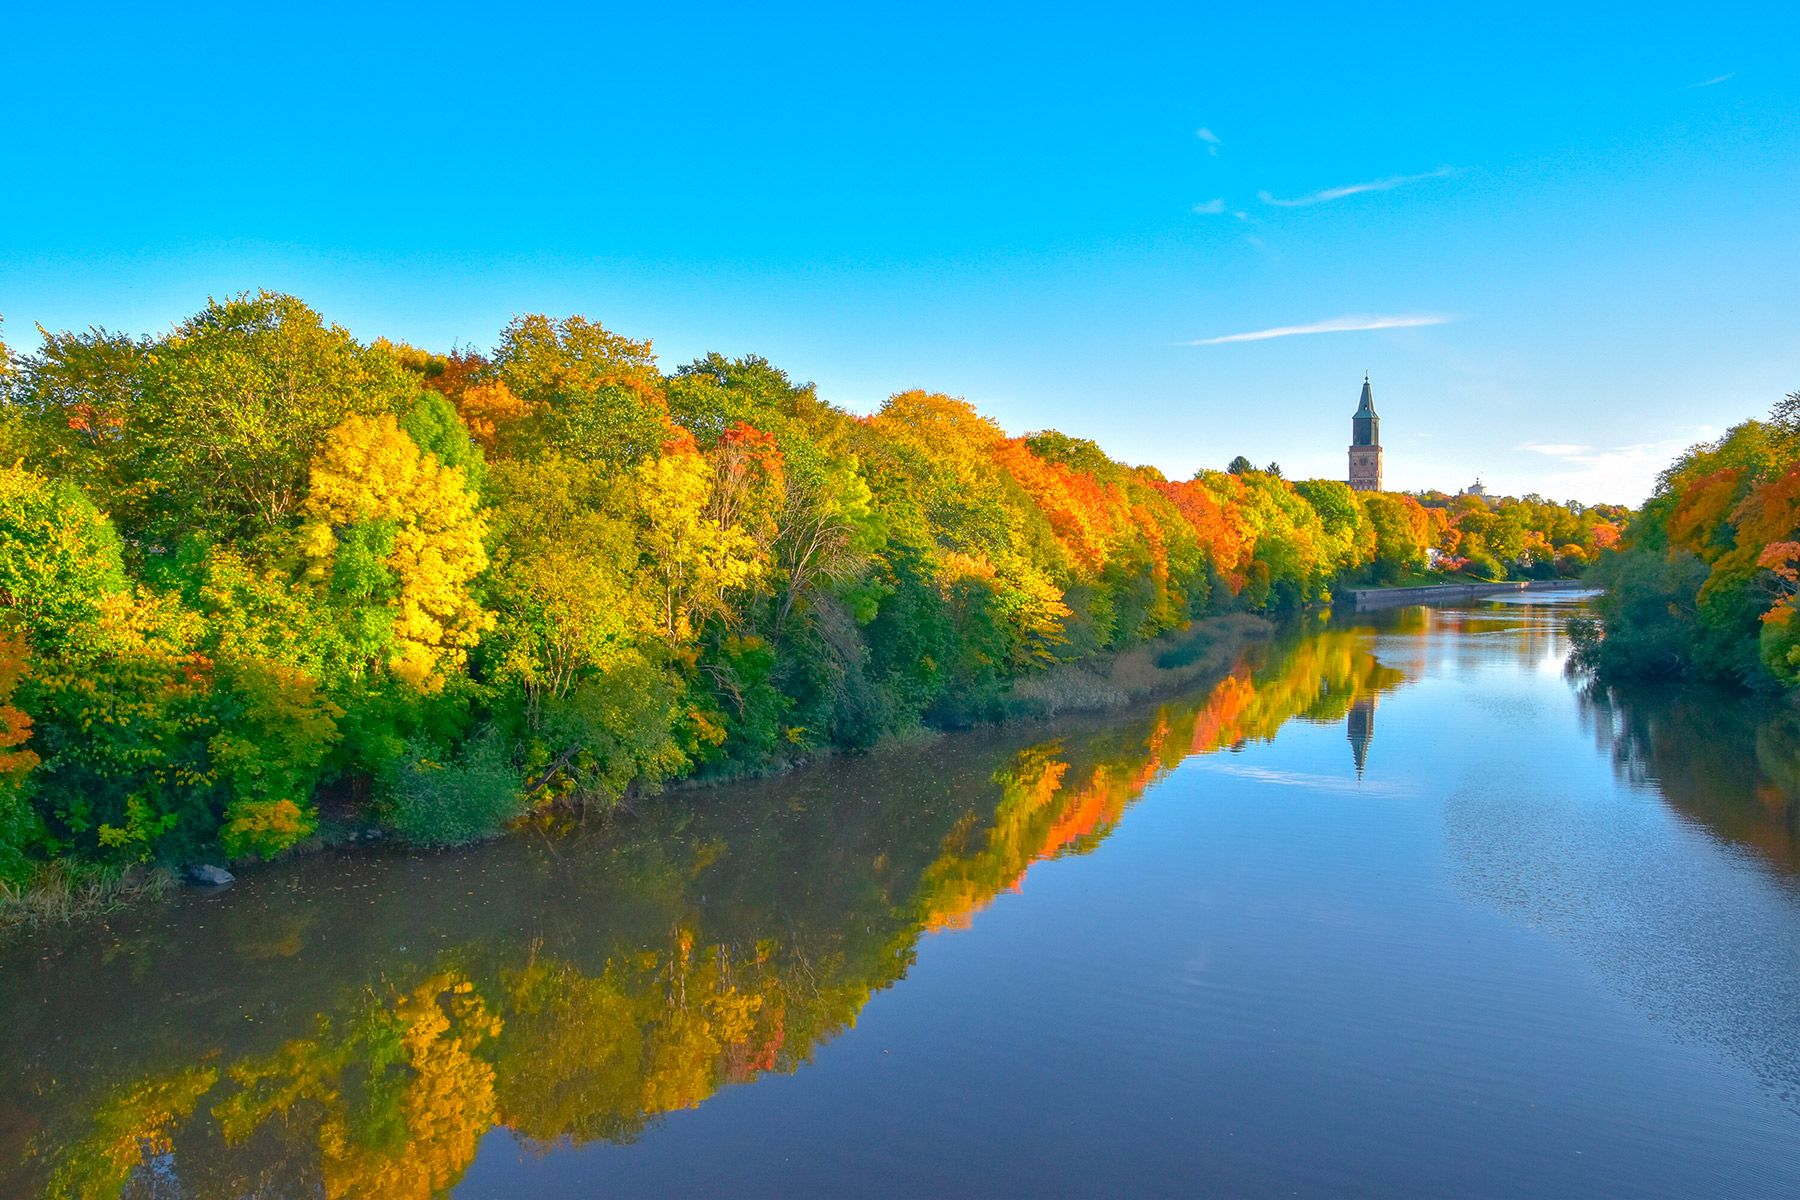 Autumn-coloured trees line the Aura River, with Turku Cathedral in the background.